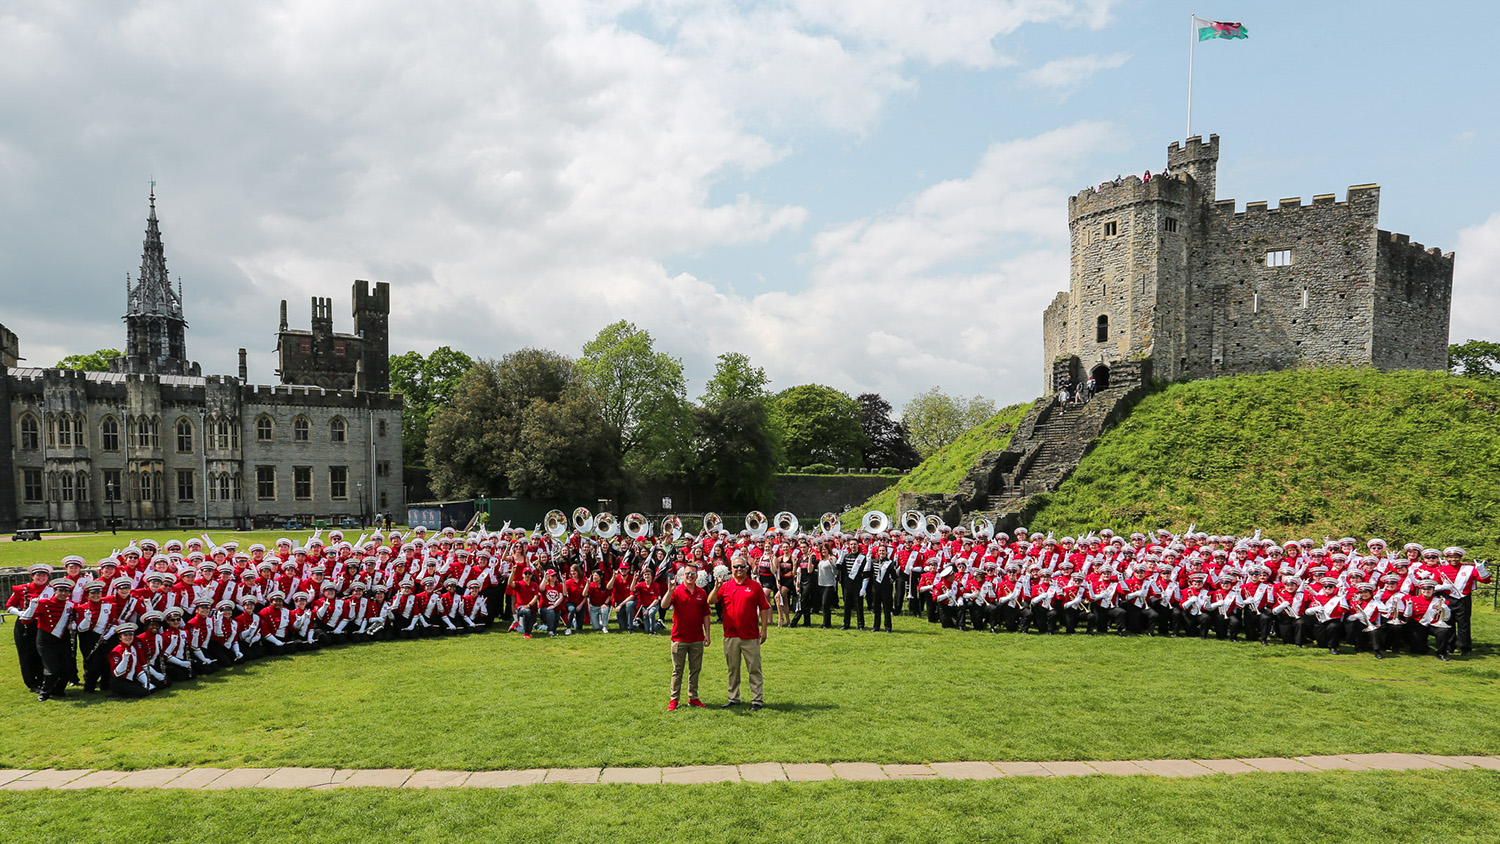 The NC State Marching Band gathers in front of a castle in Wales.